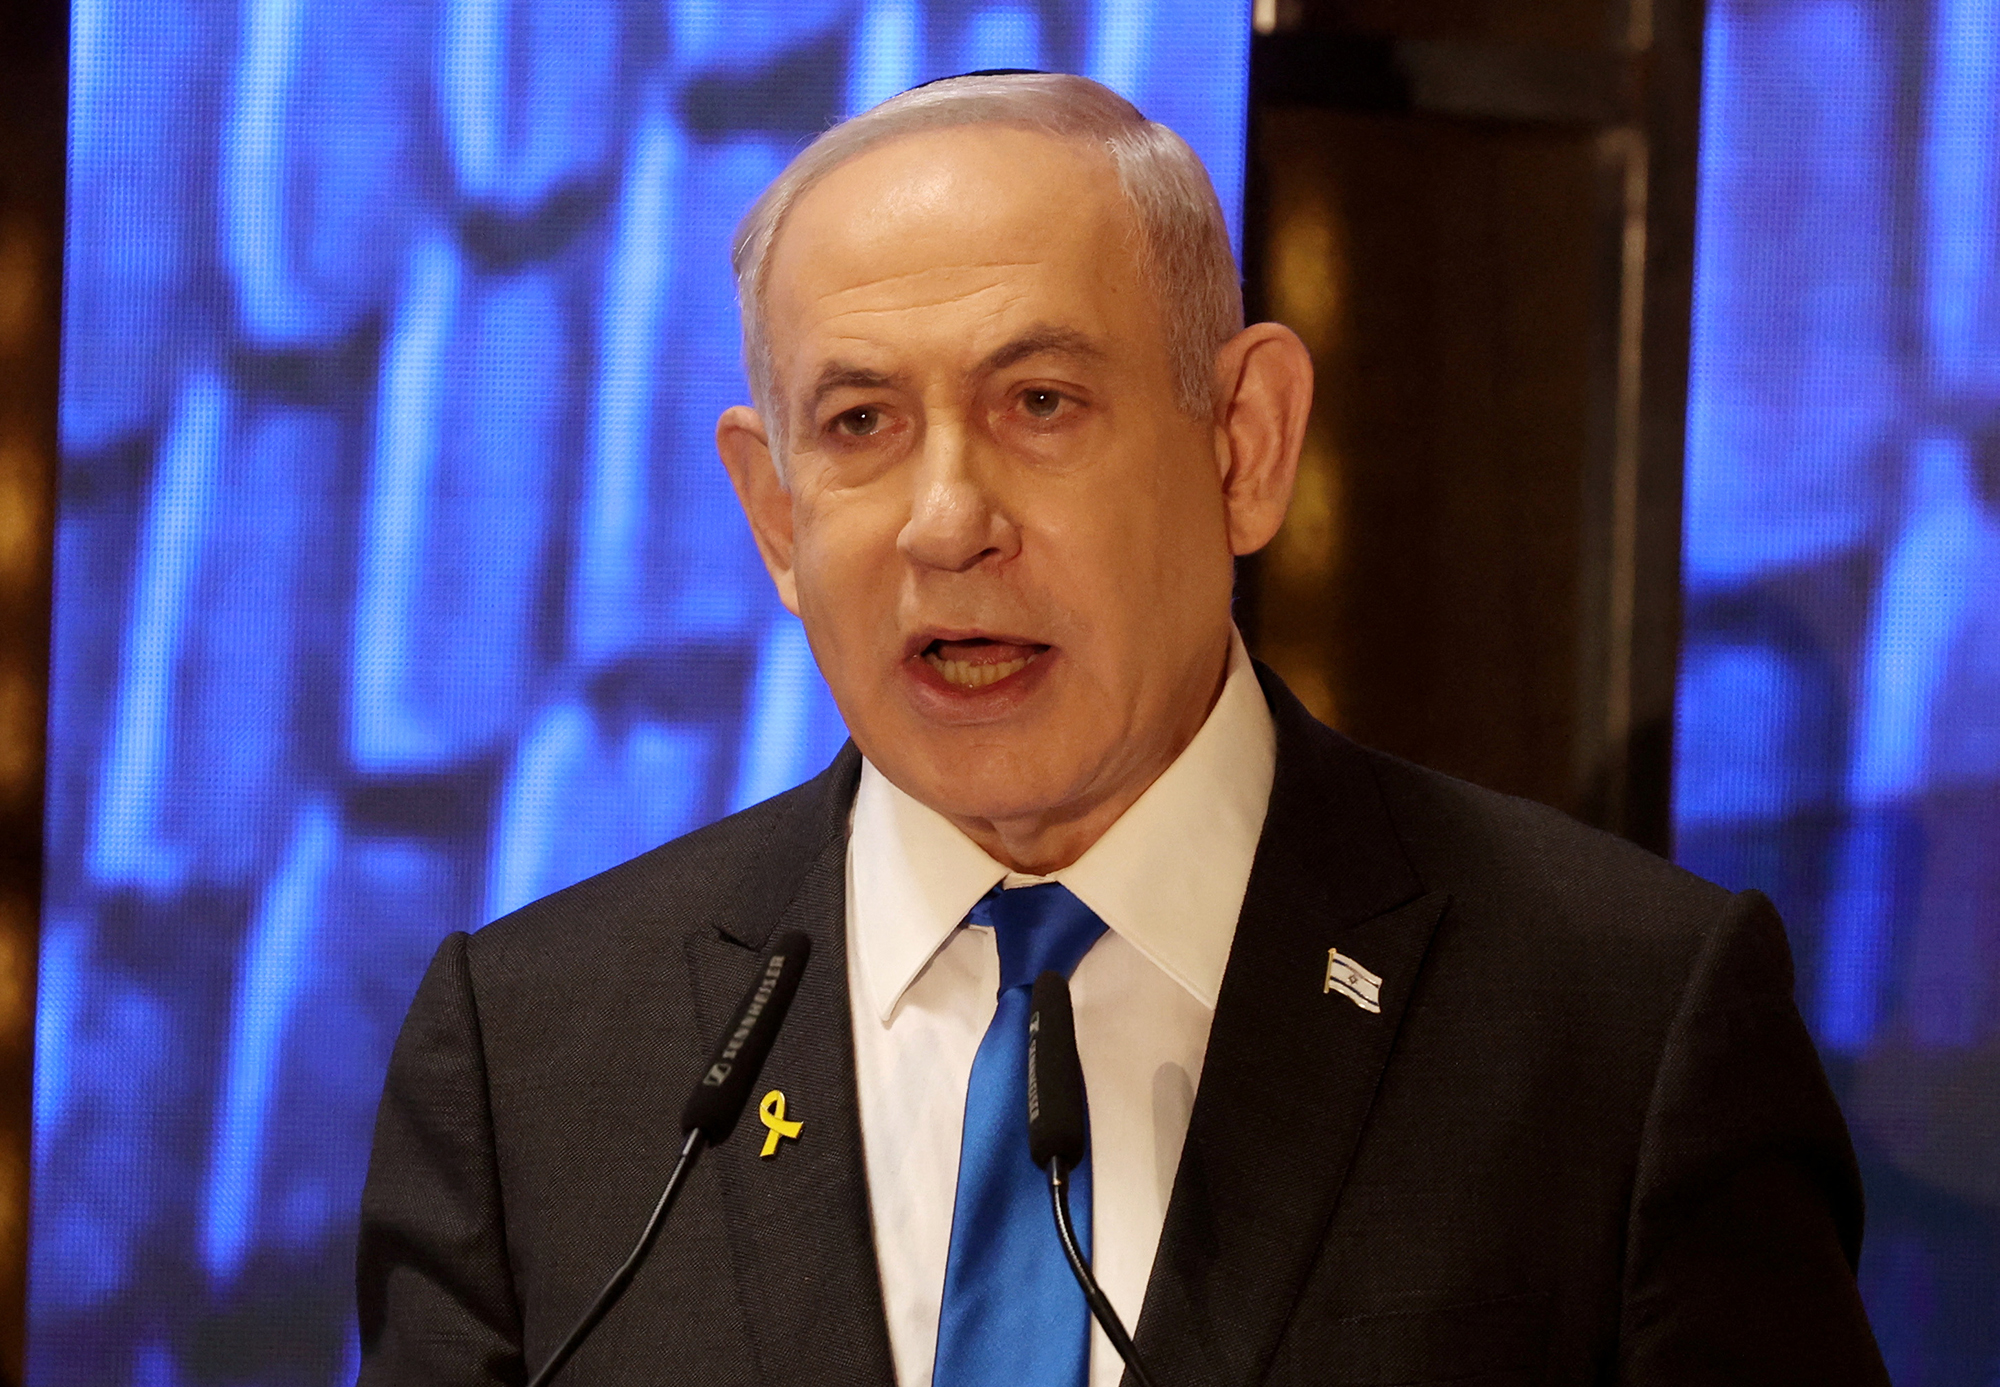 Israeli Prime Minister Benjamin Netanyahu speaks during a ceremony marking Memorial Day for fallen soldiers of Israel's wars and victims of attacks, at Jerusalem's Mount Herzl military cemetery, on May 13.